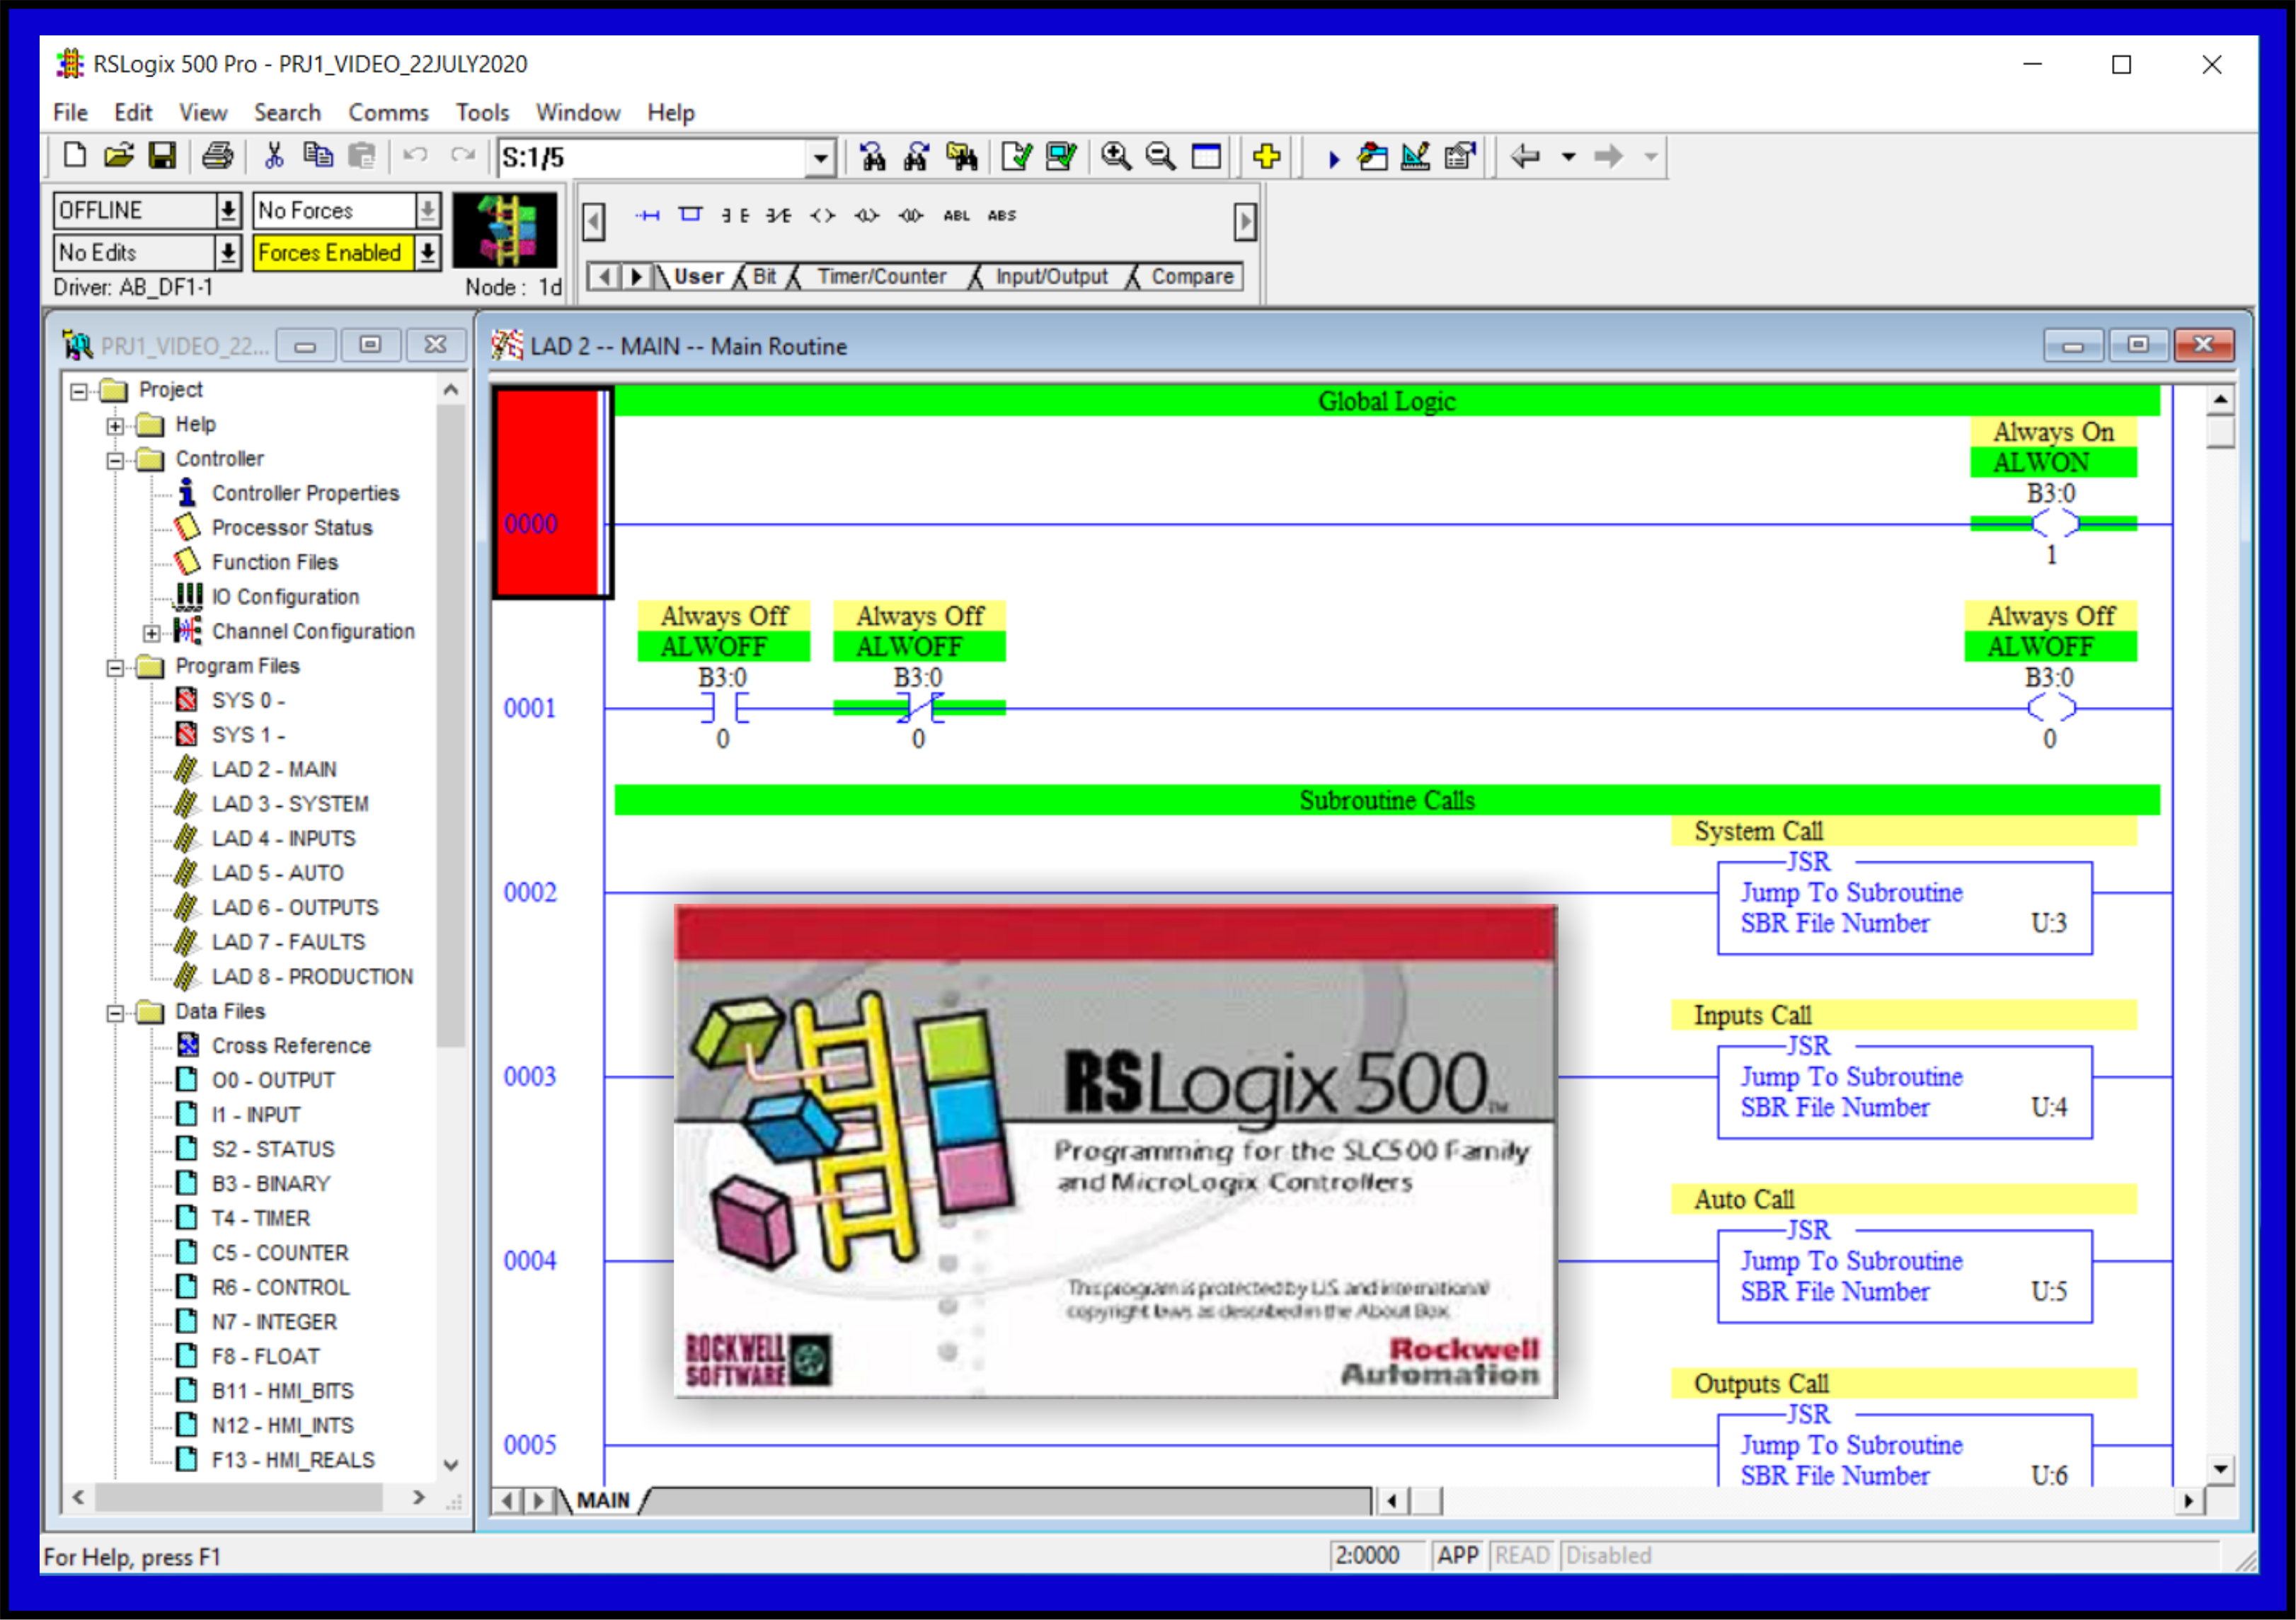 rslogix 500 software download for windows 10